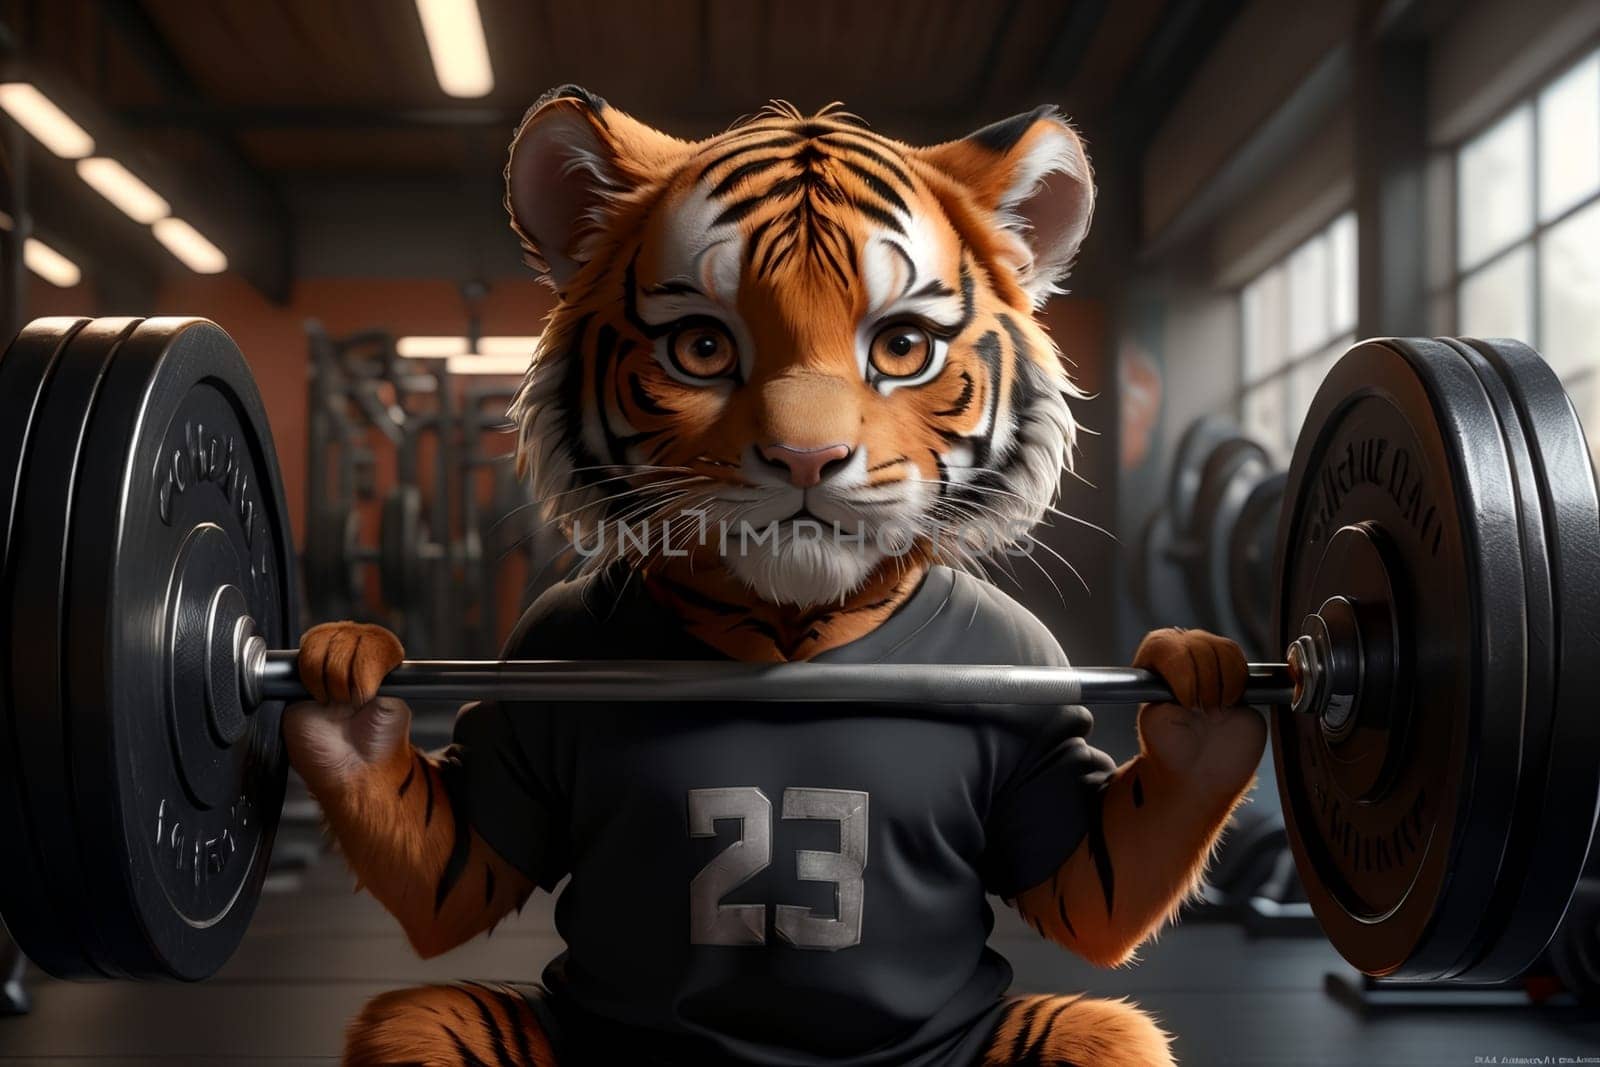 tiger goes in for sports in the gym, lifts a heavy barbell .